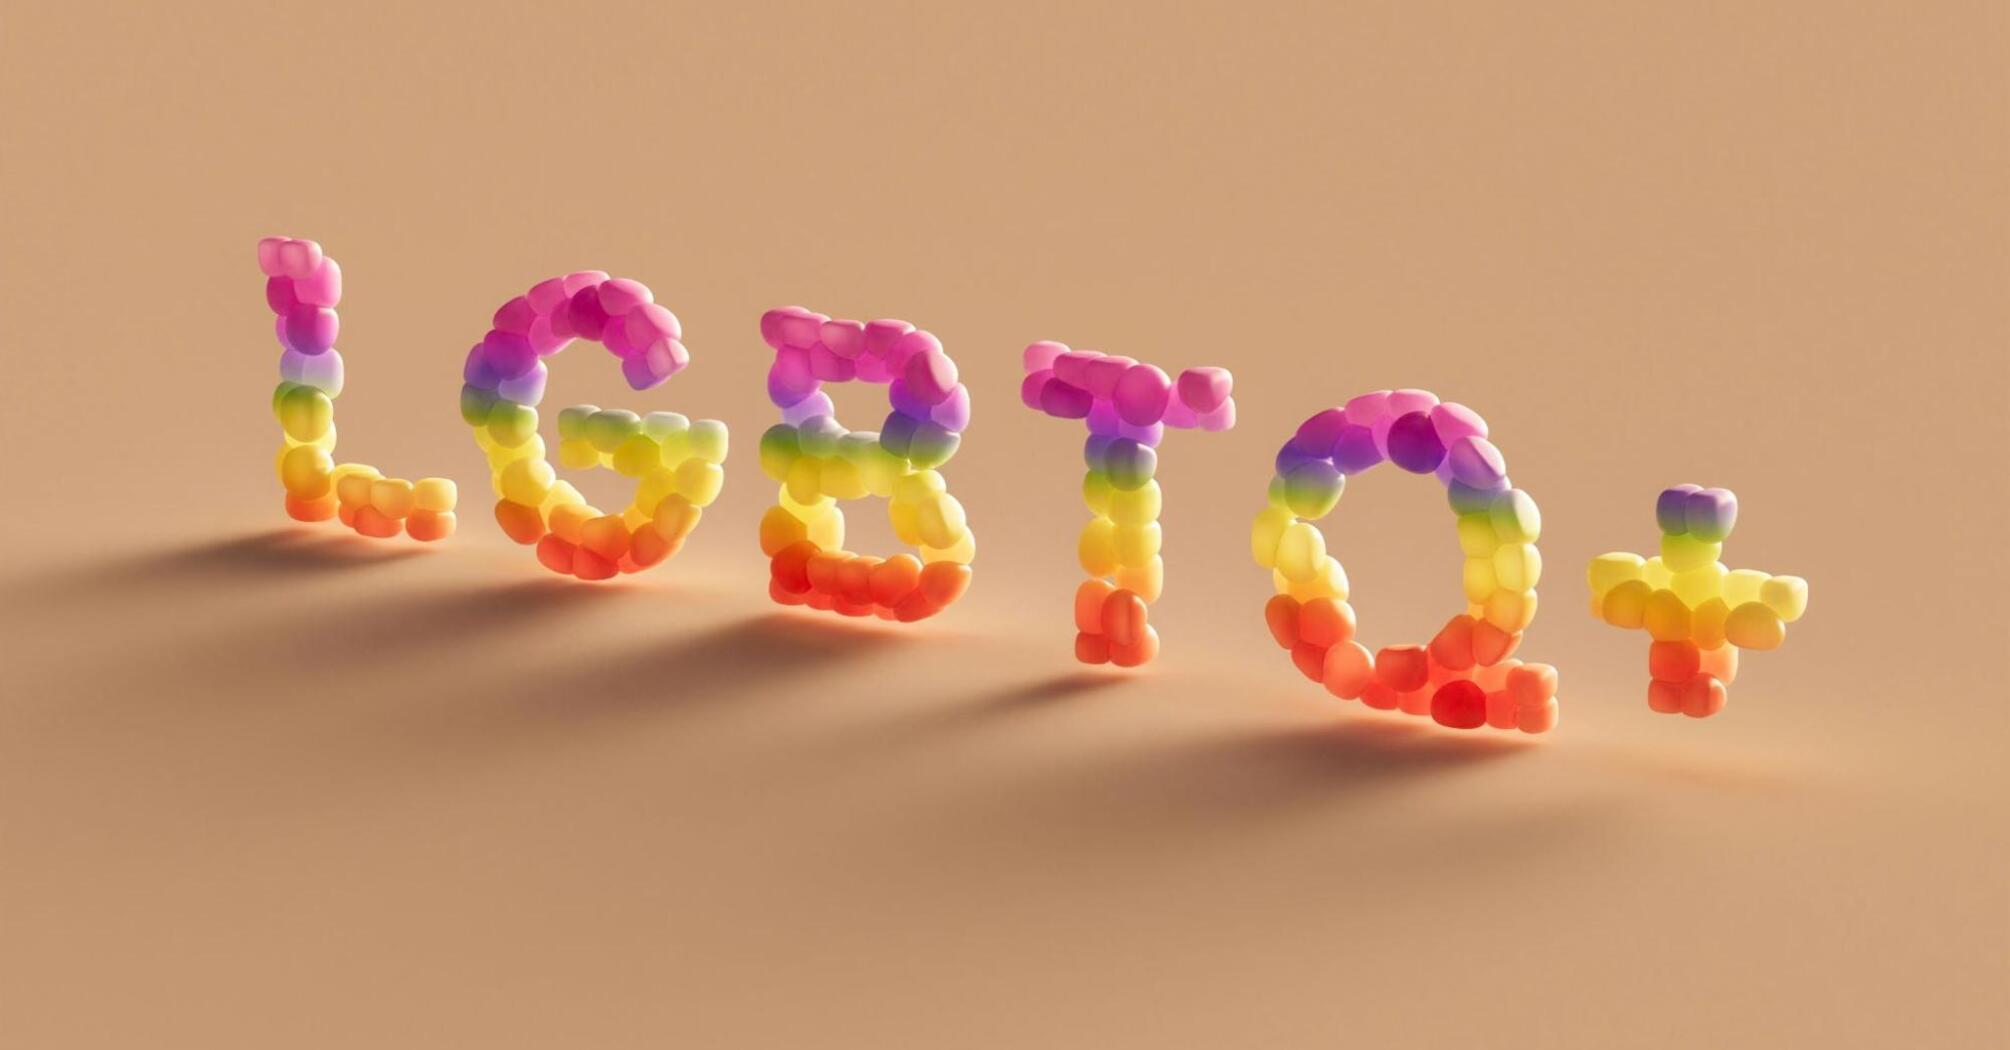 Bright inscription "LGBTQ+" made of multi-colored balls on a beige background